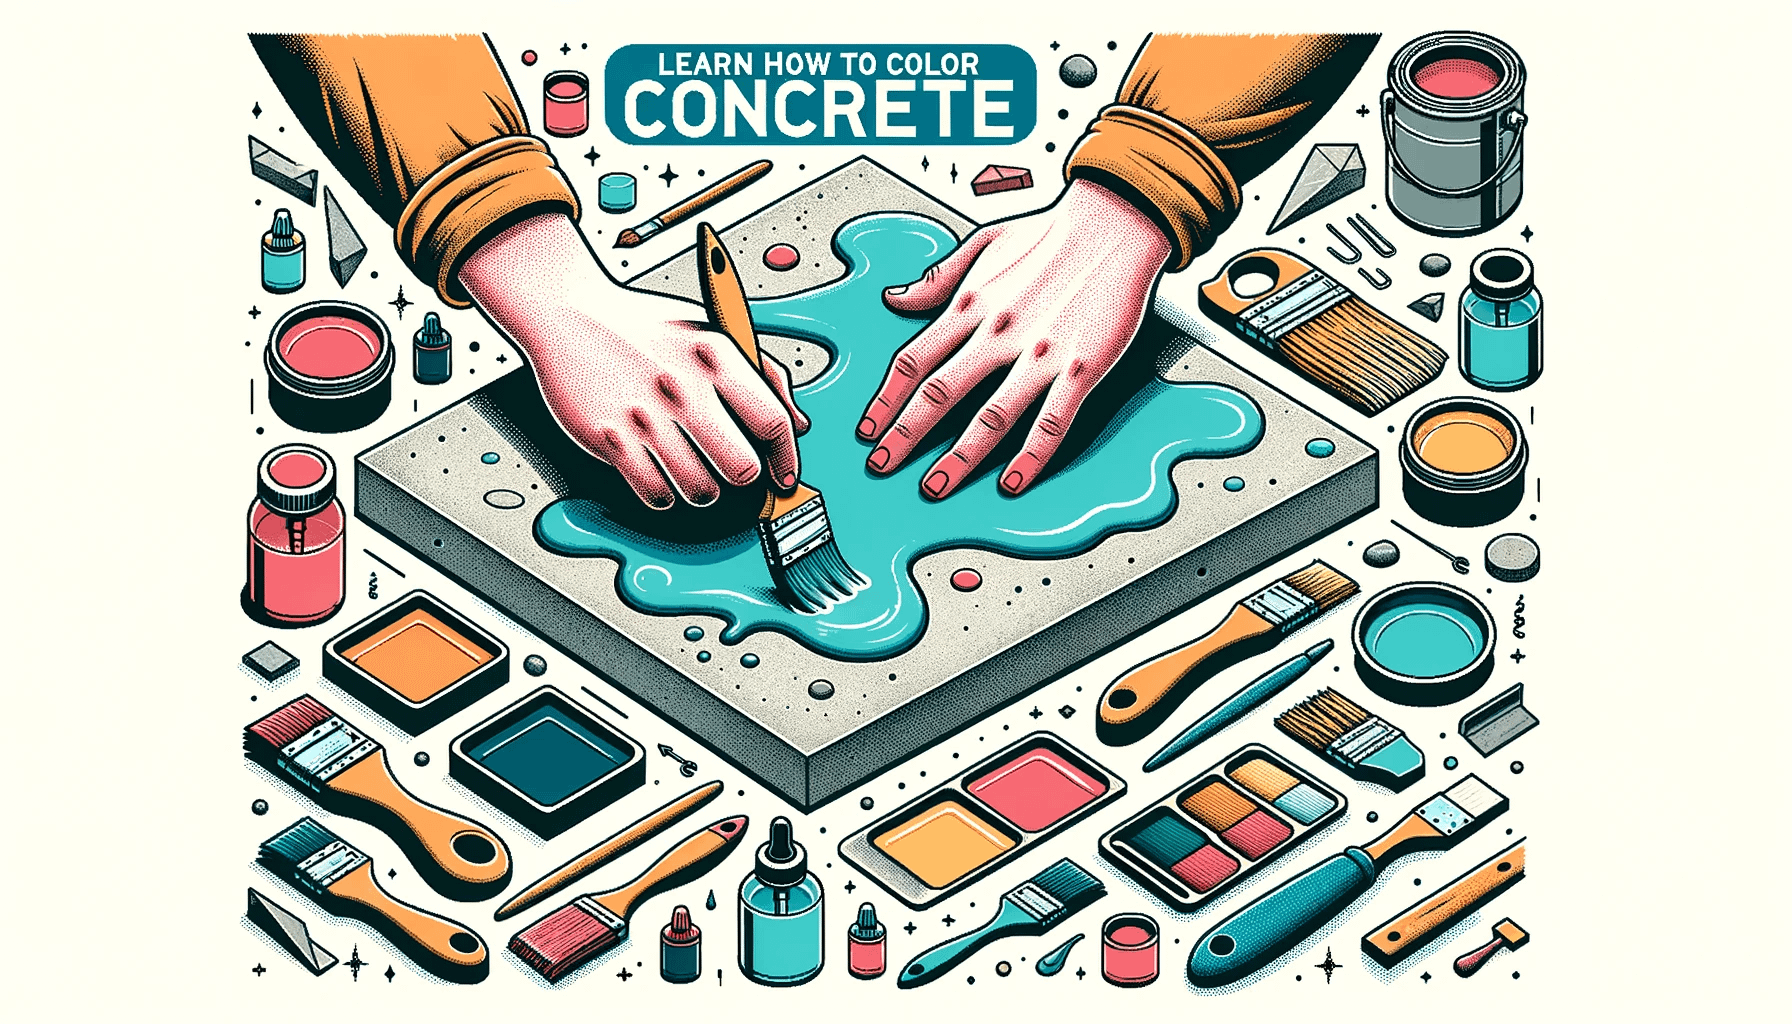 Learn How to Color Concrete